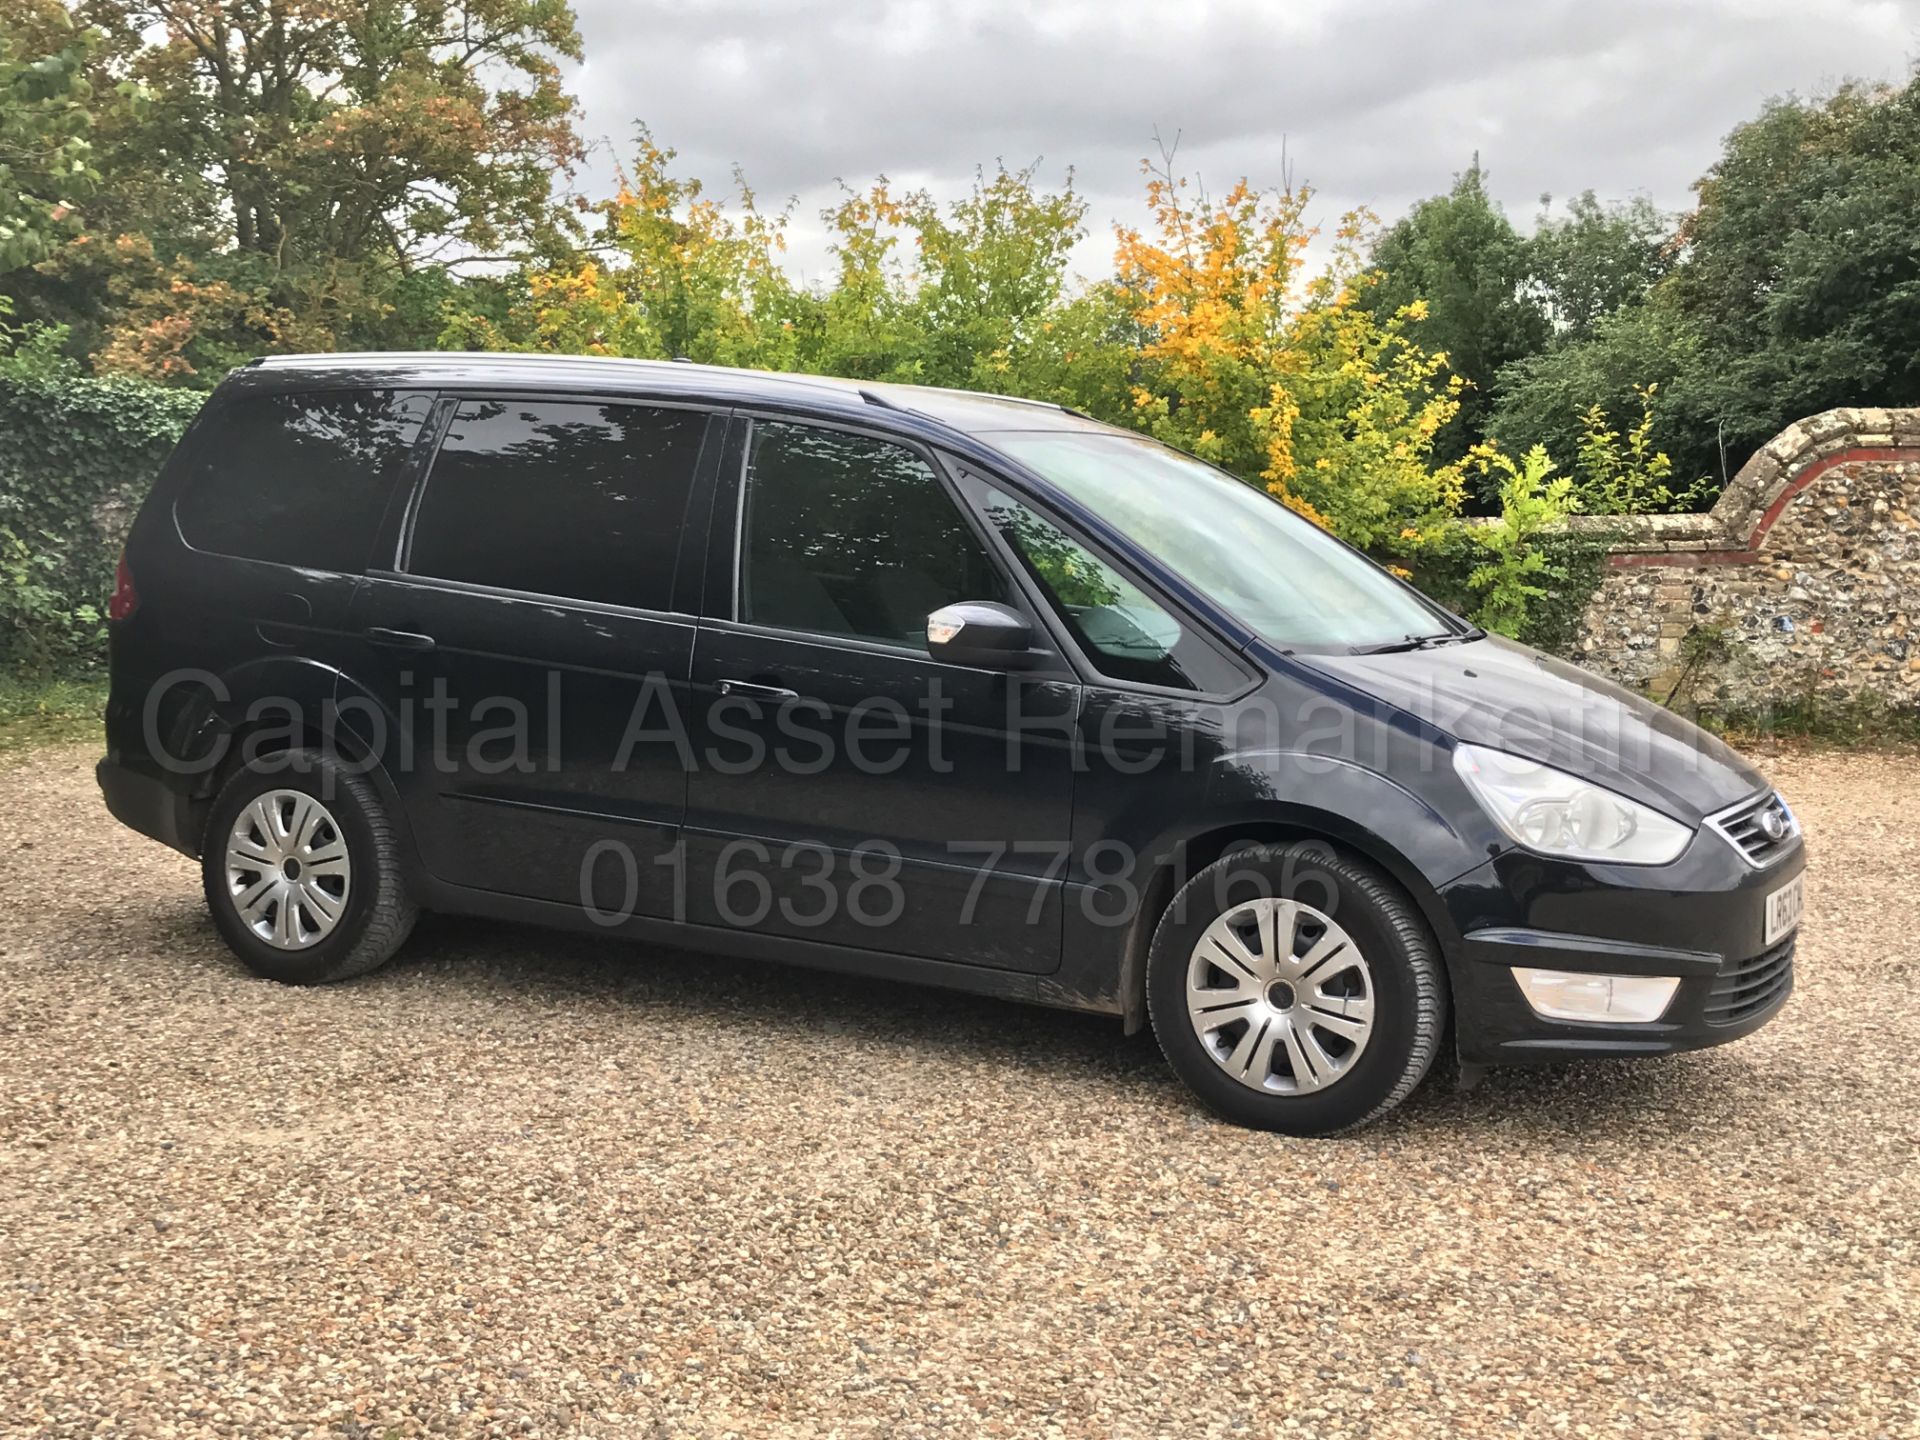 FORD GALAXY 'ZETEC' 7 SEATER MPV (2014 MODEL) '2.0 TDCI - 140 BHP - POWER SHIFT' (1 OWNER FROM NEW) - Image 10 of 27